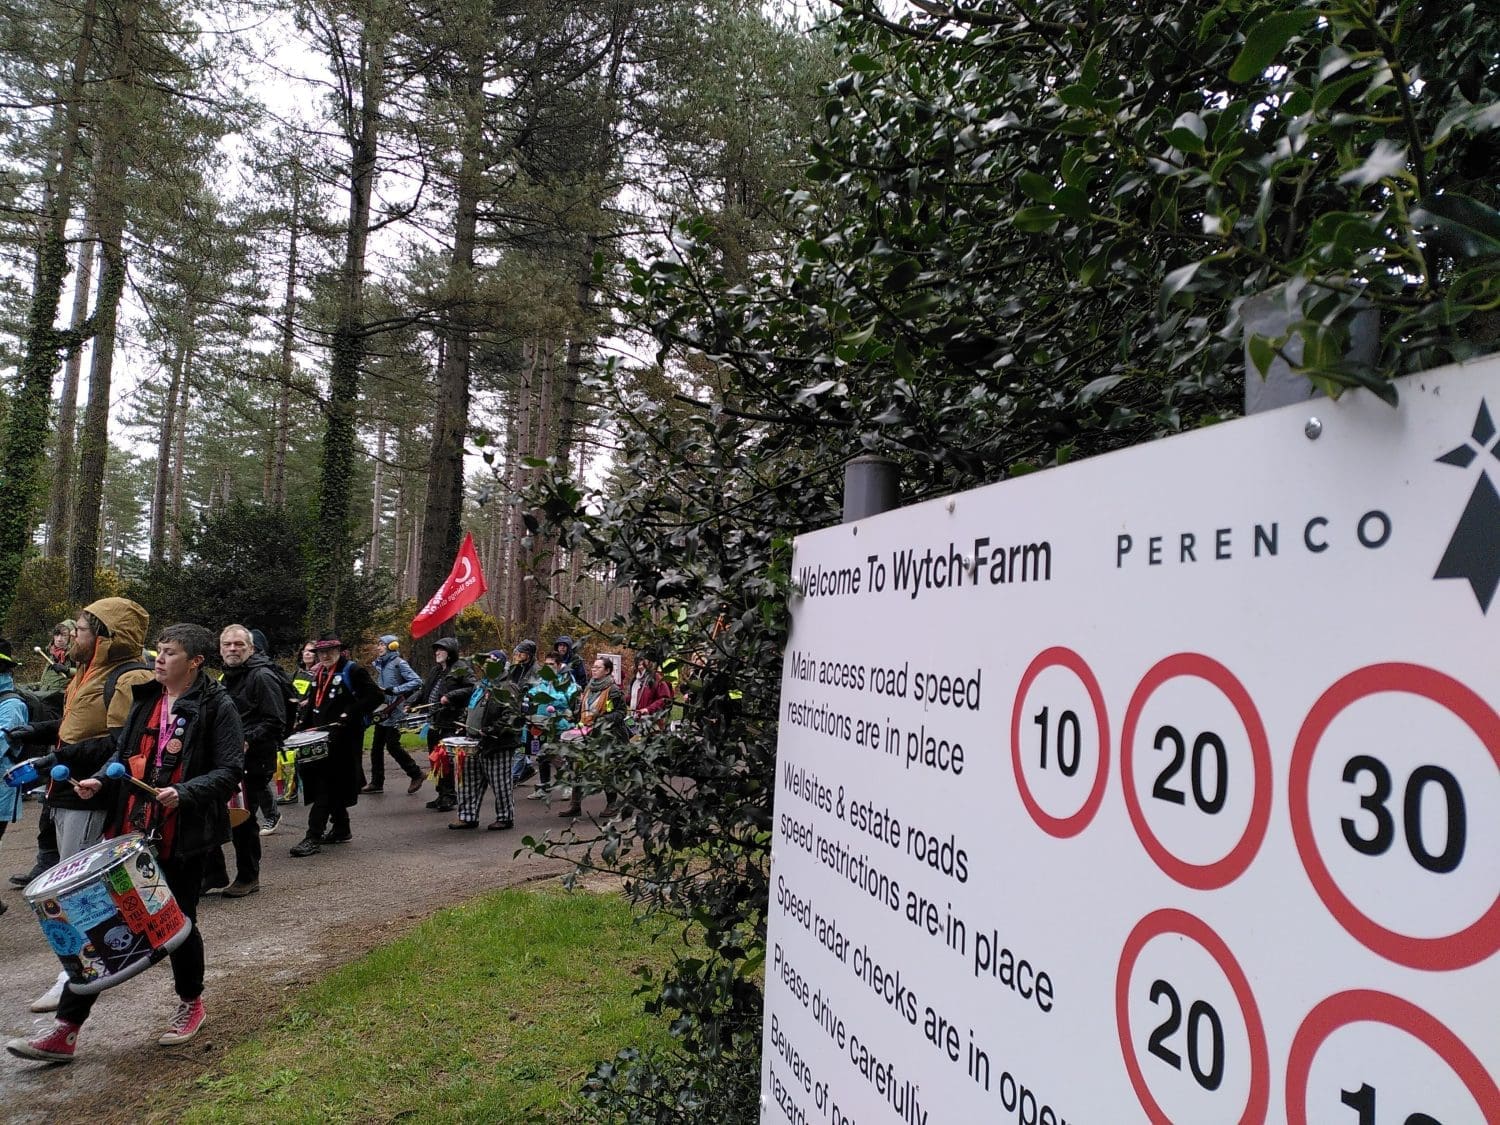 Protesters turn the corner to Wytch Farm's entrance. Perenco Wytch Farm sign in the foreground.